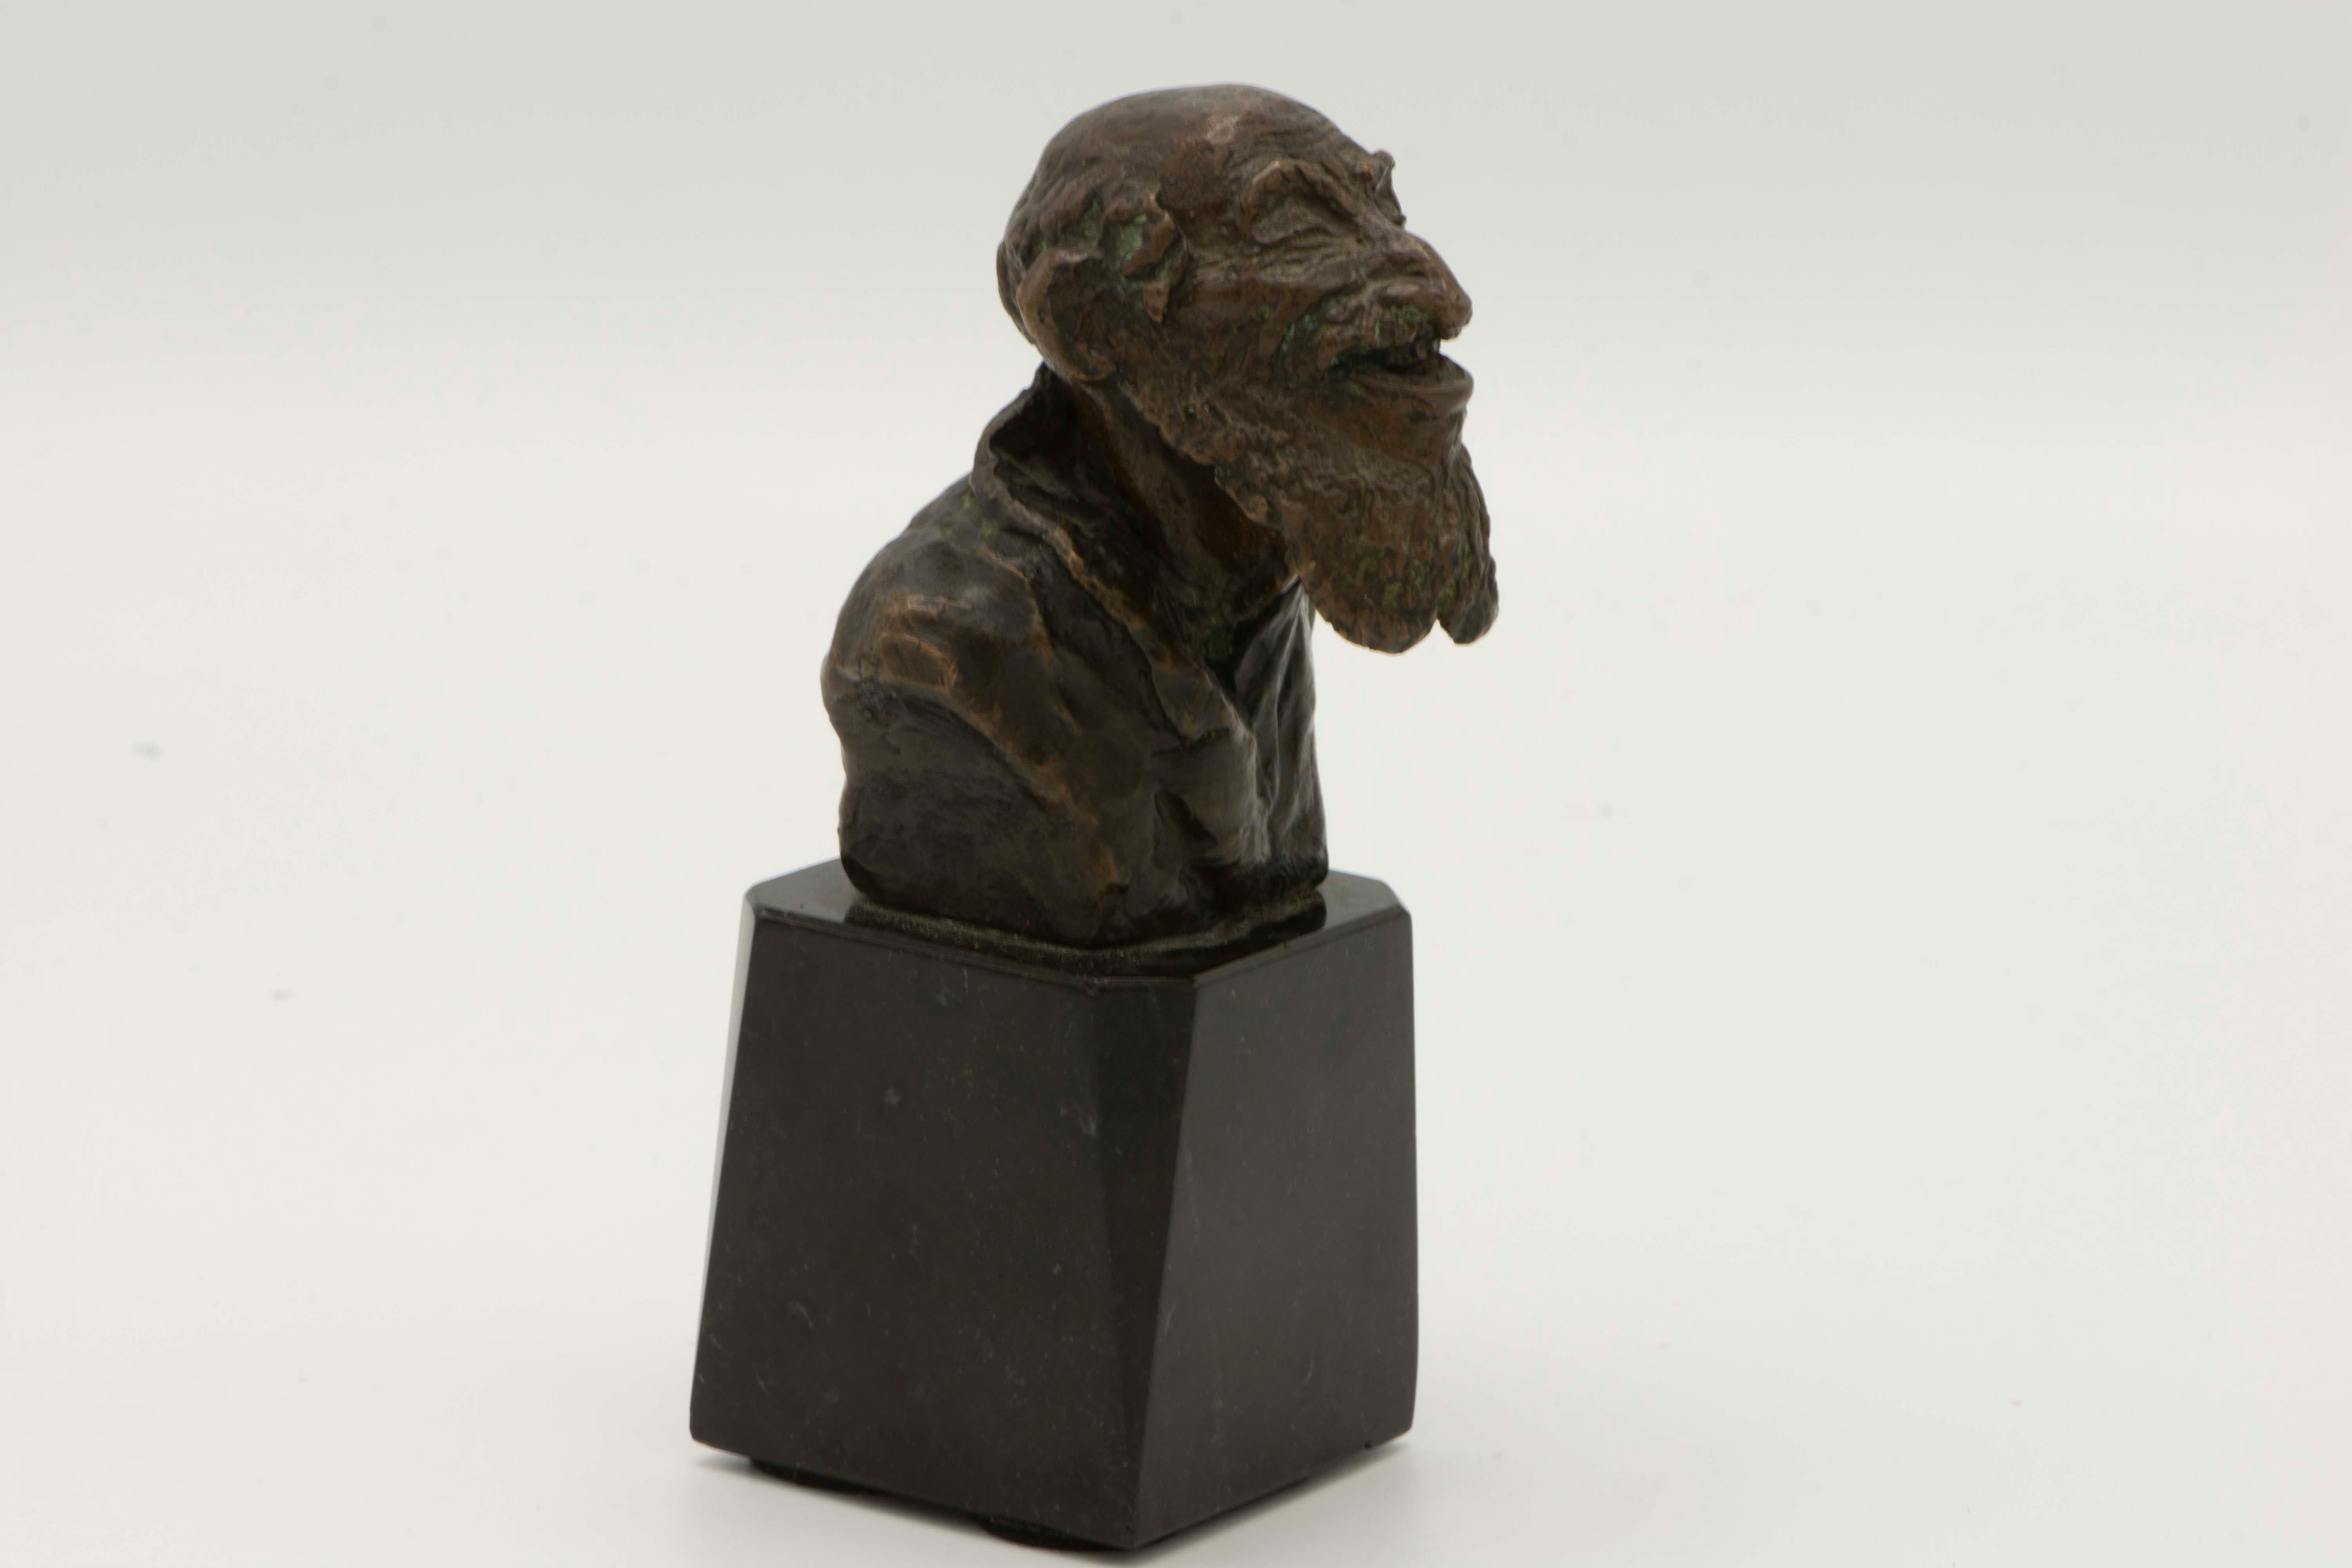 Extremely well cast, with very fine details, bronze bust of a bearded Jew, Austria ,circa 1880.
The bust is screwed on a marble base, and measures 3.25 inches high, 2.5 inches wide, 2.25 inches deep.
This bronze would have been very expensive to